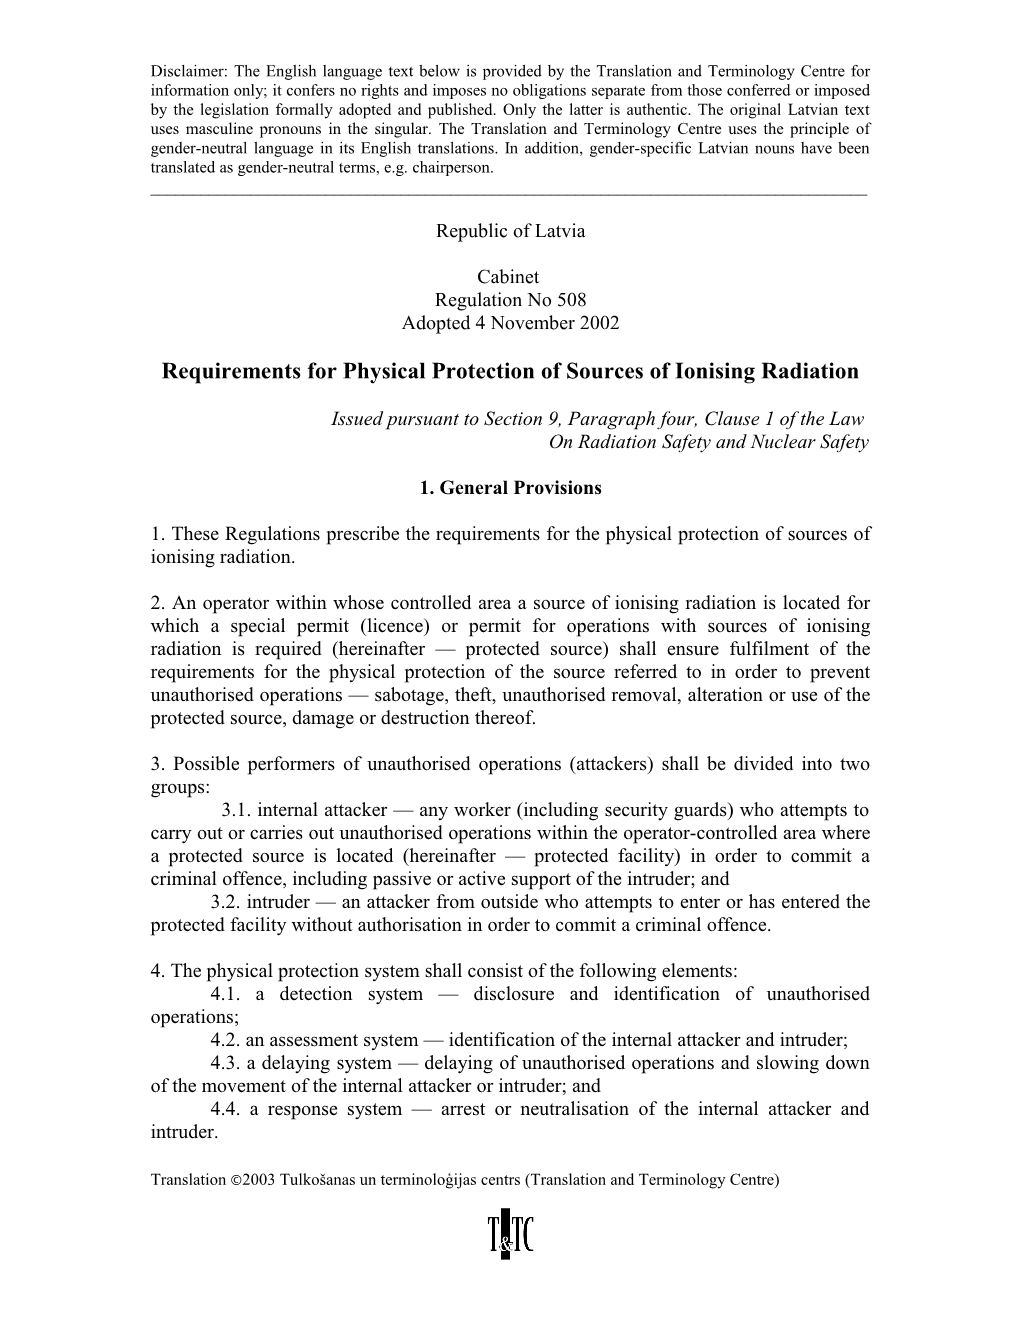 Requirements for Physical Protection of Sources of Ionising Radiation